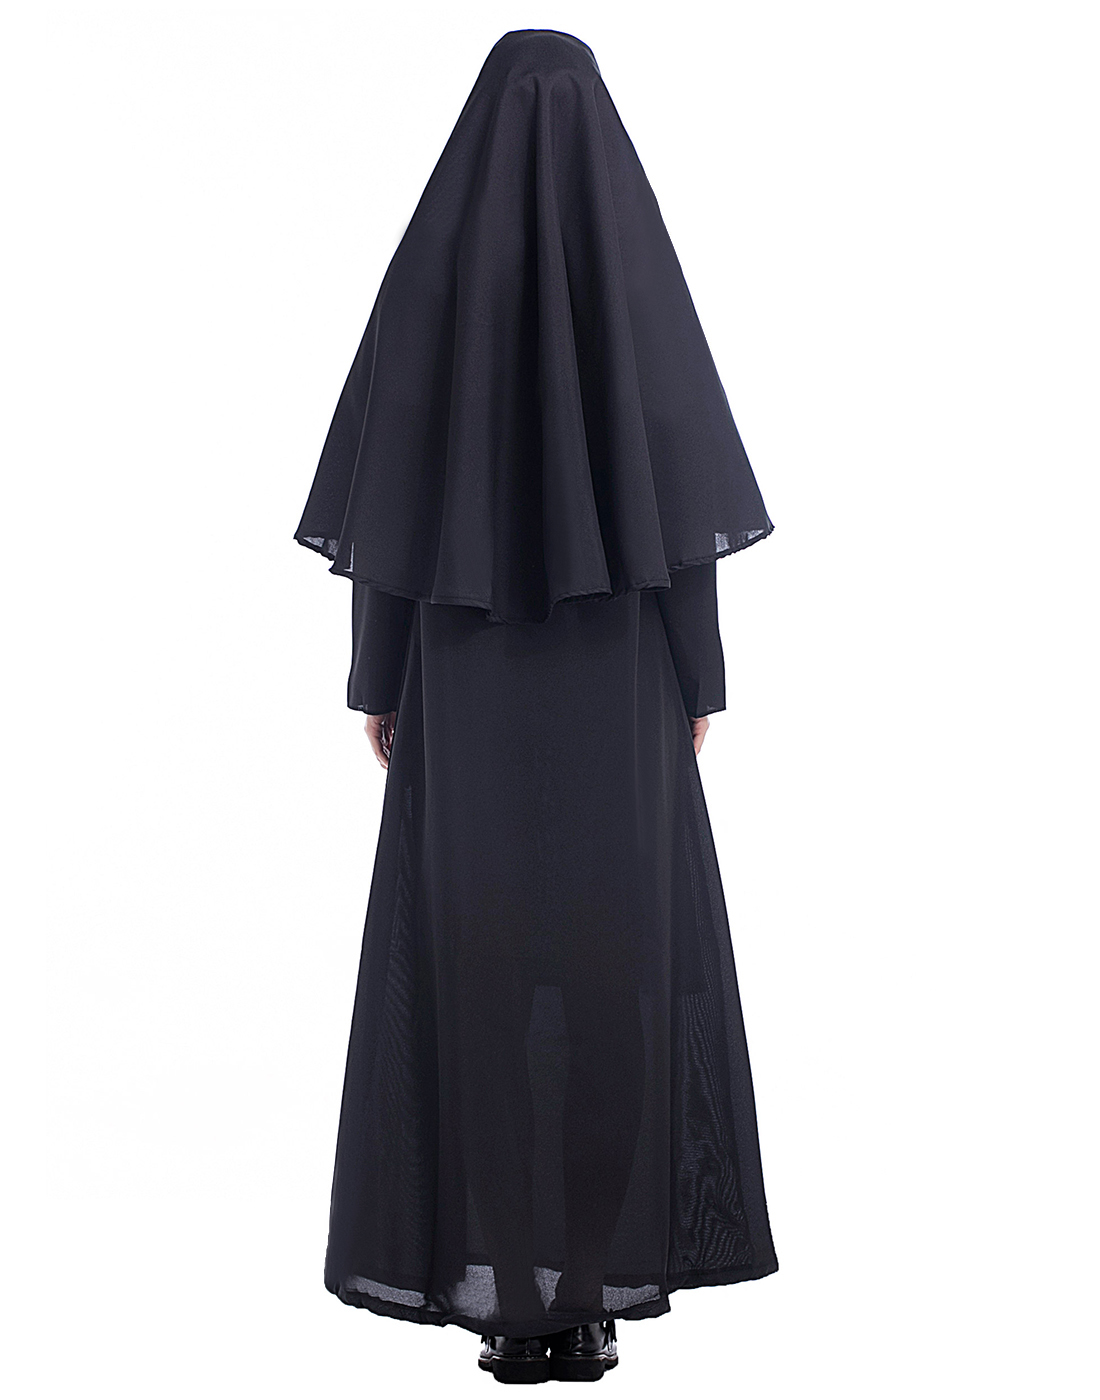 HDE Nun Costume for Women Traditional Adult Sister Black Robe and Habit Religious Halloween Costumes - image 4 of 4